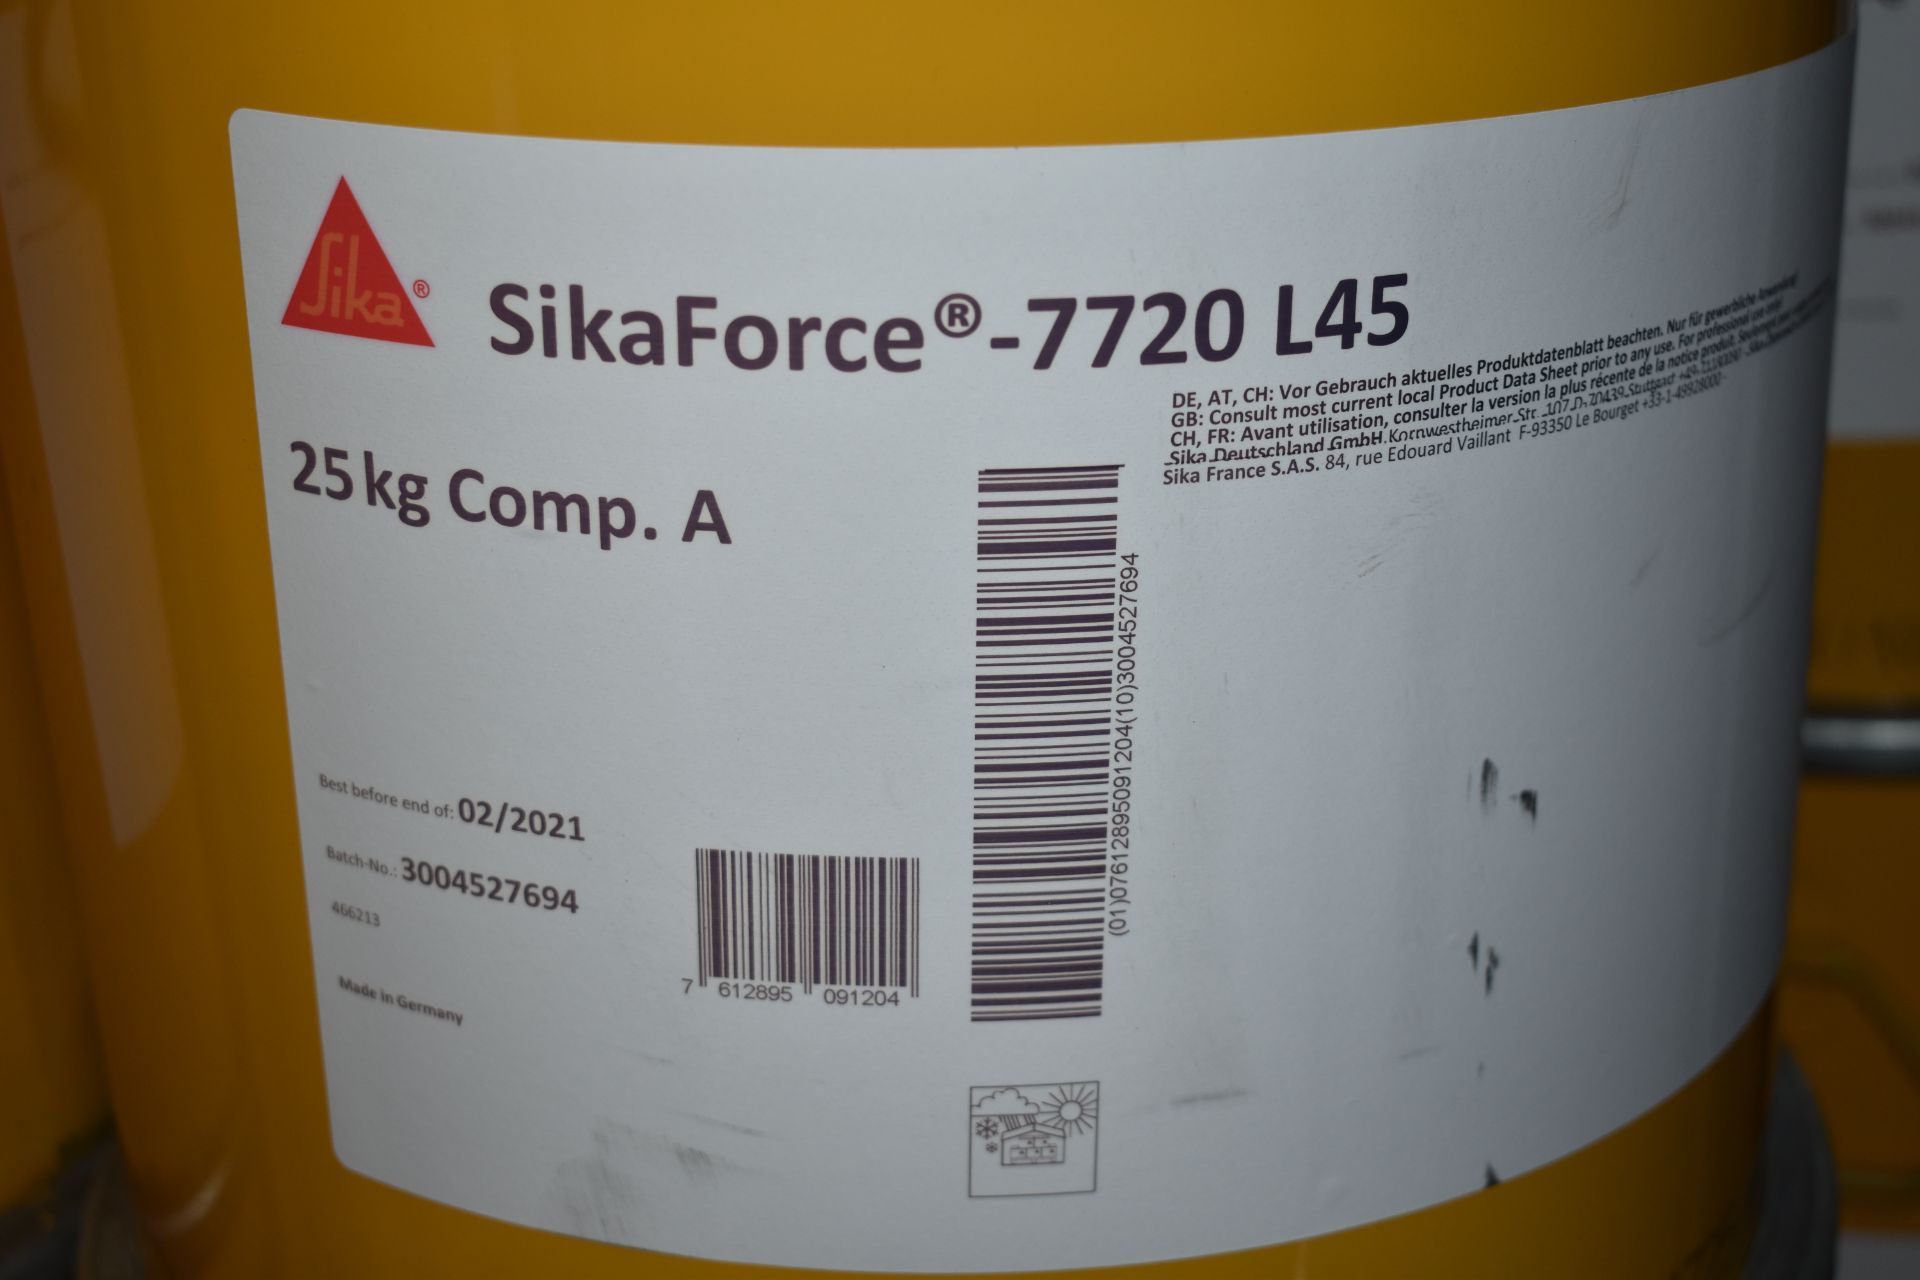 1 x SikaForce -7720 L45 None Sagging Assembly Adhesive 25kg Barrel - New Sealed Stock - CL622 - - Image 2 of 3